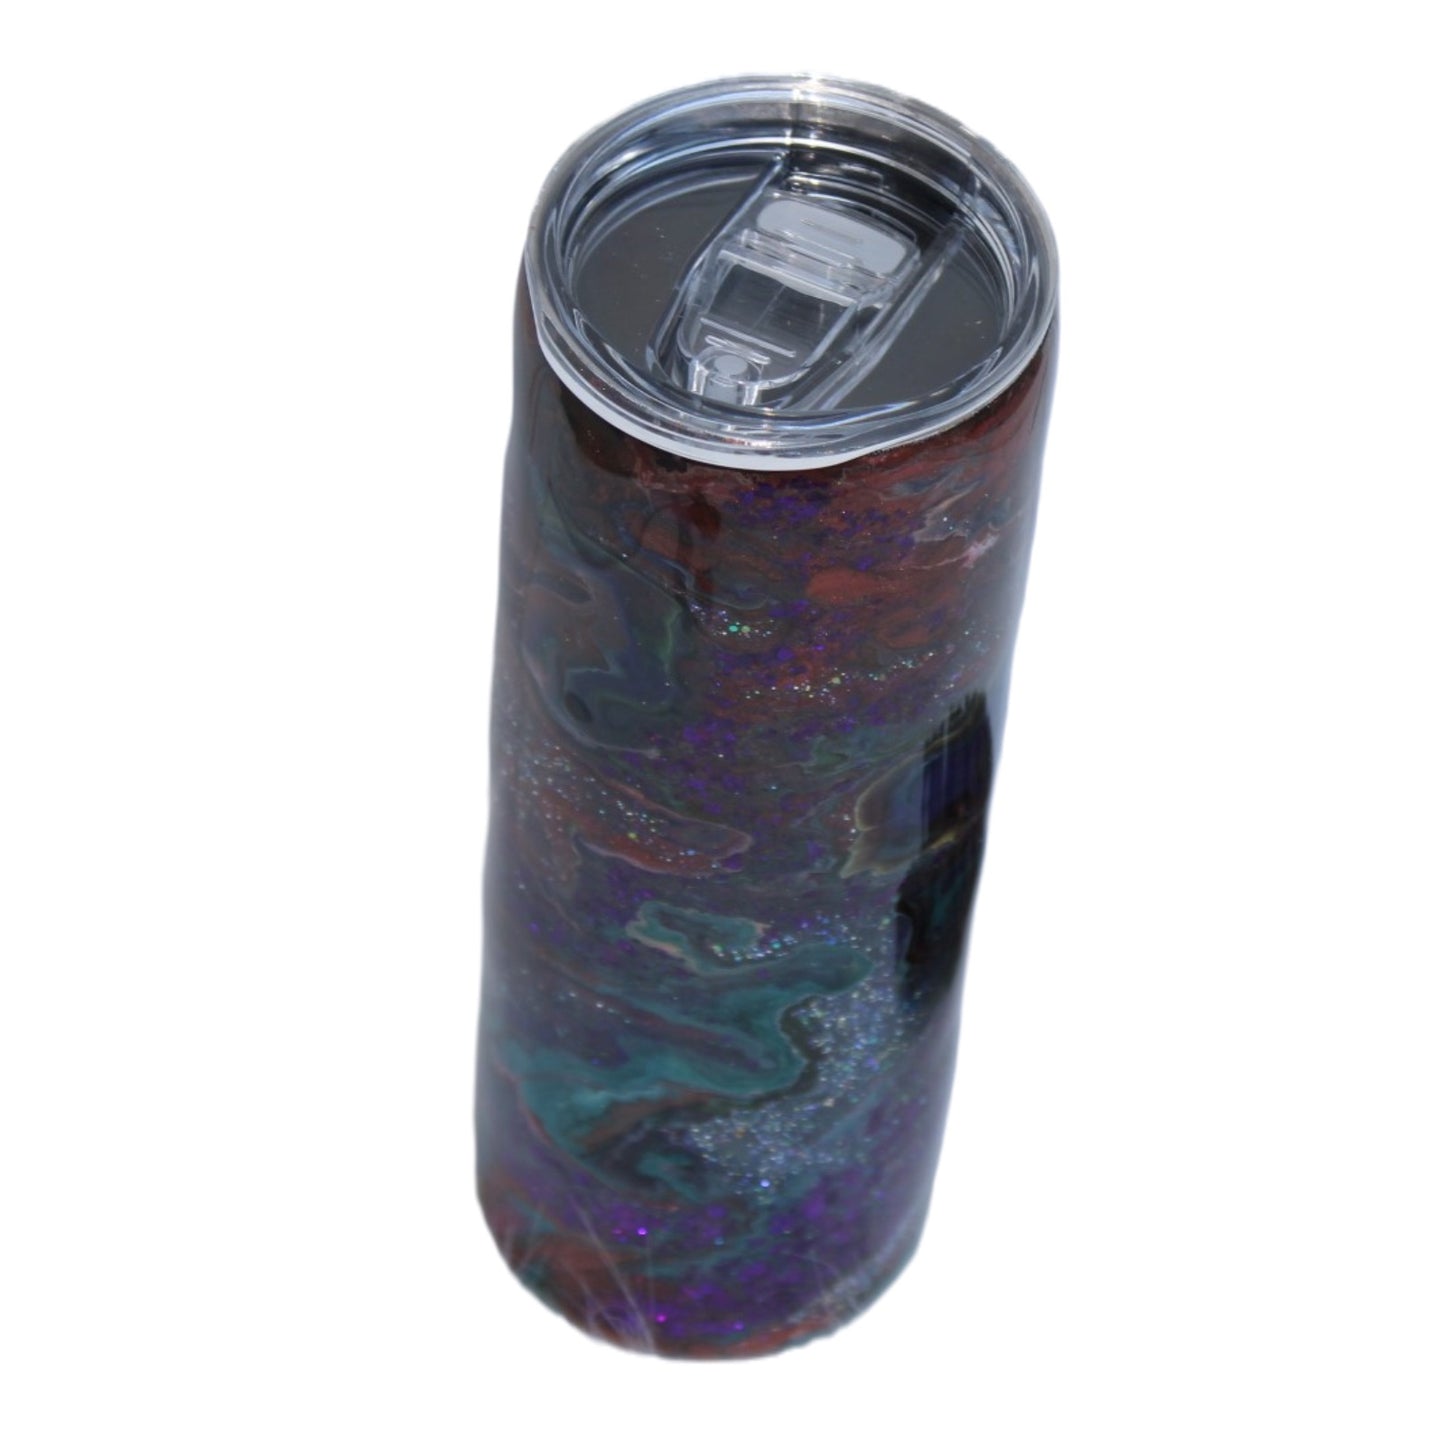 Tumbler Straight Skinny 20 ounce we named (Oil and Water)